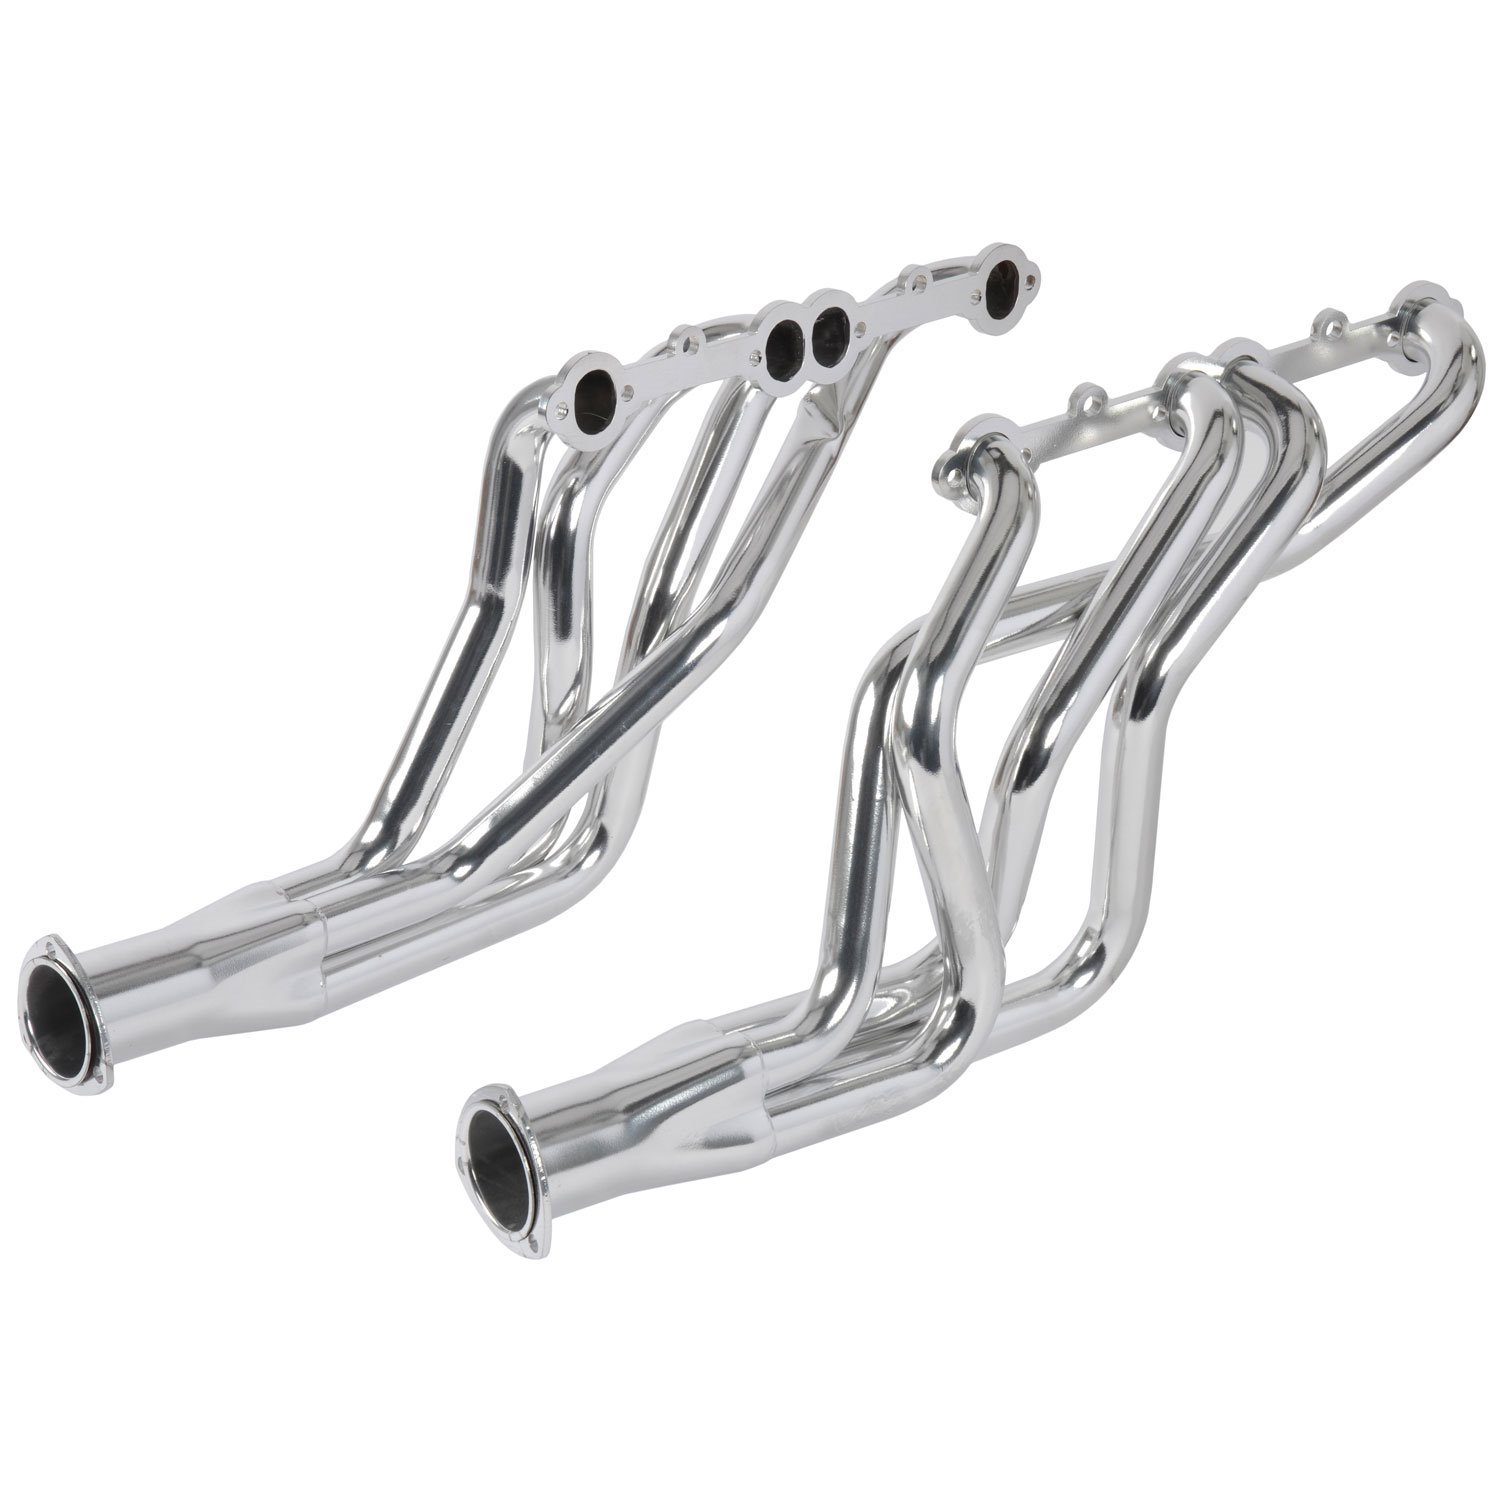 Ceramic Coated Long Tube Headers for 1964-1989 GM Passenger Cars with Small Block Chevy 265-400 ci